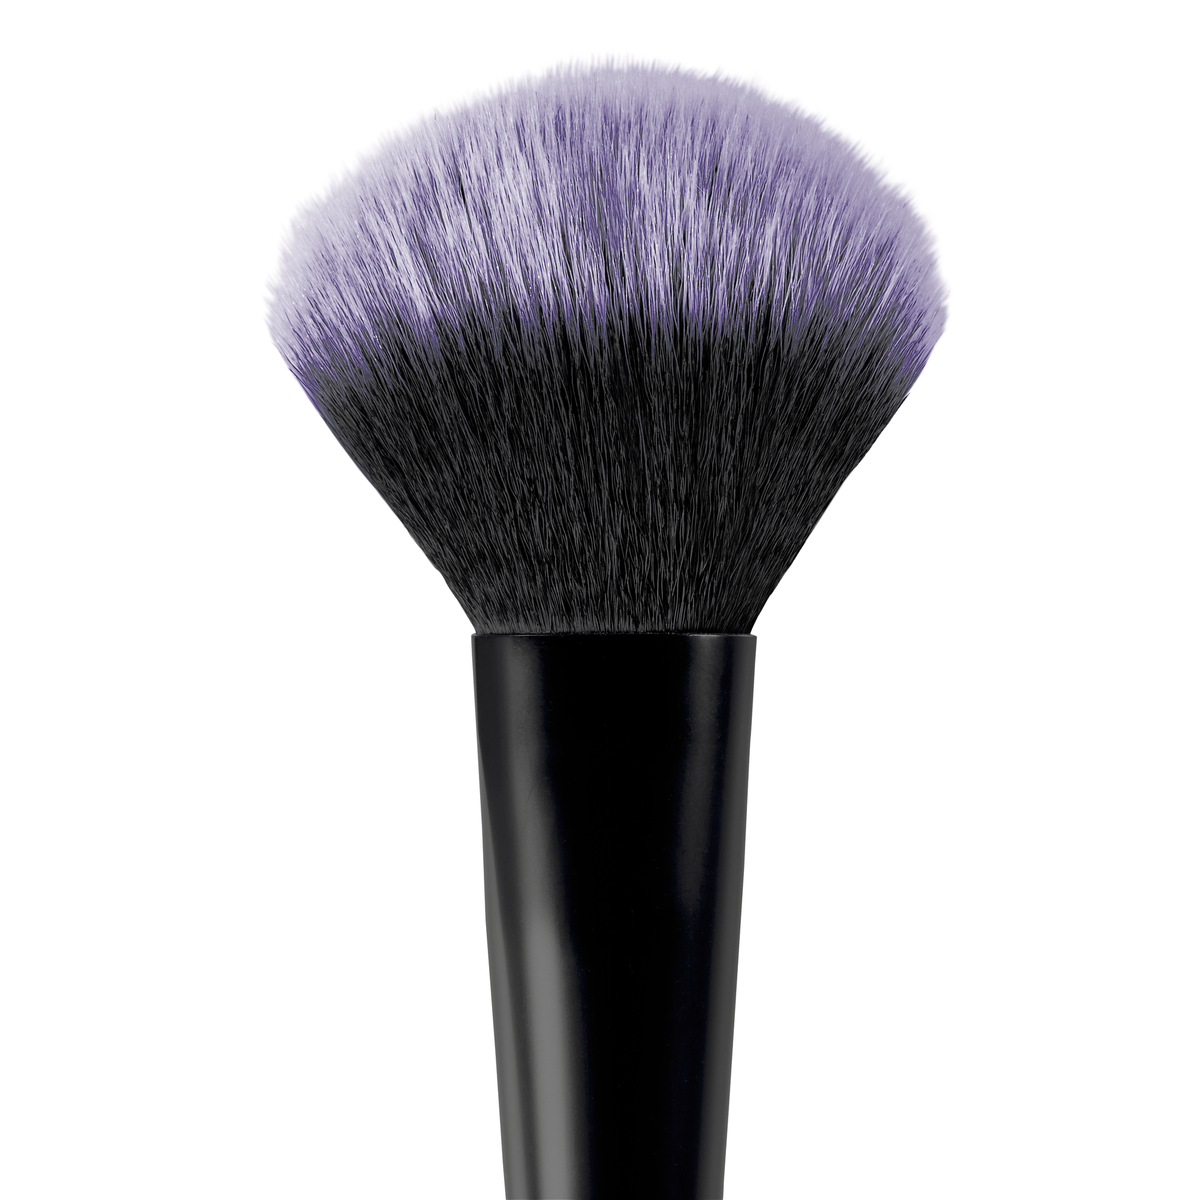 Brush head detail, showing bi-color synthetic bristles fanning out widely from the handle for a delicate and wide-area powder application technique.